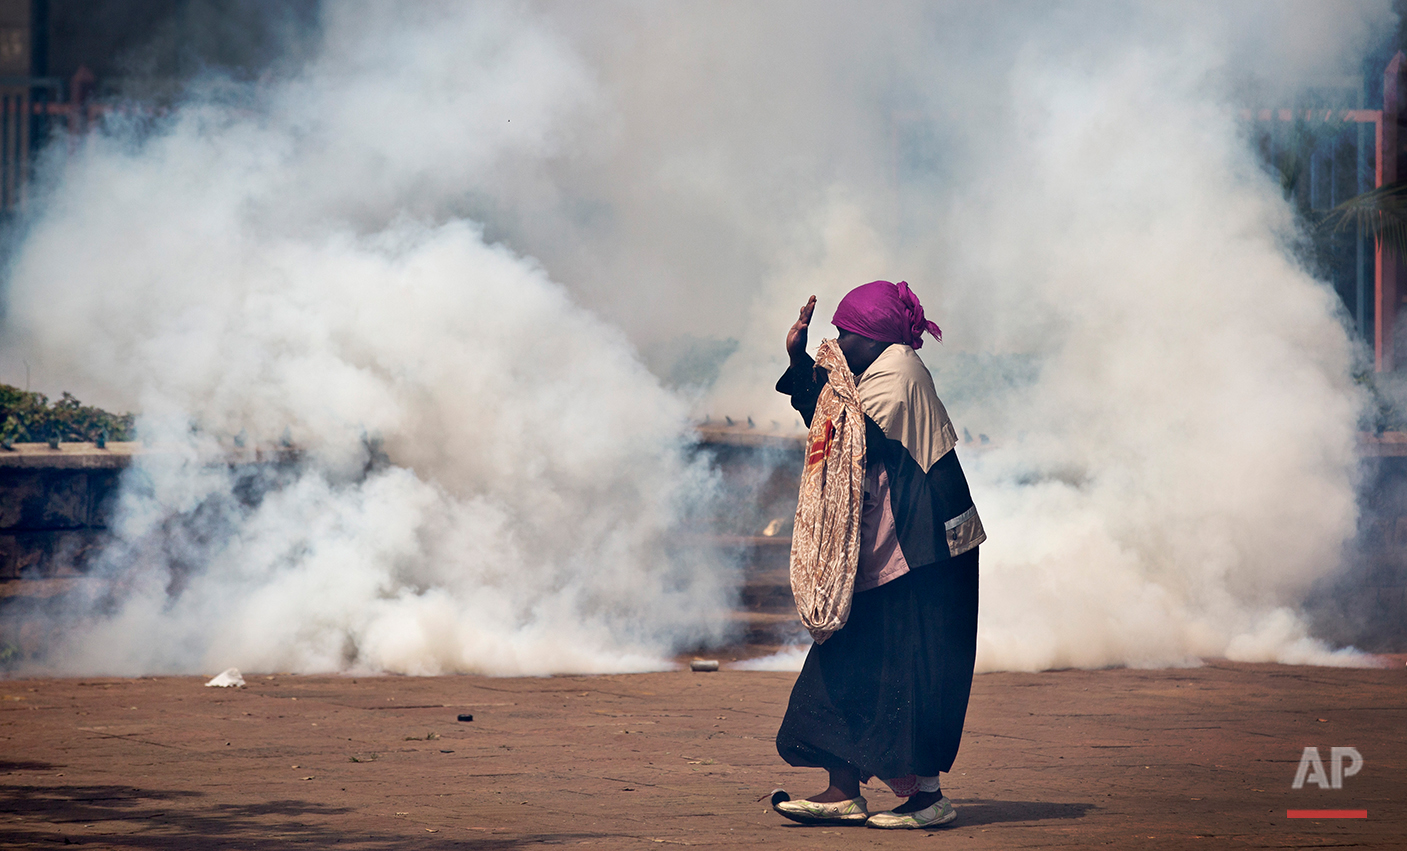  An elderly woman caught up in the clashes holds her hands in the air as a riot policeman approach amidst clouds of tear gas, during a protest in downtown Nairobi, Kenya Monday, May 16, 2016. Kenyan police have tear-gassed and beaten opposition suppo